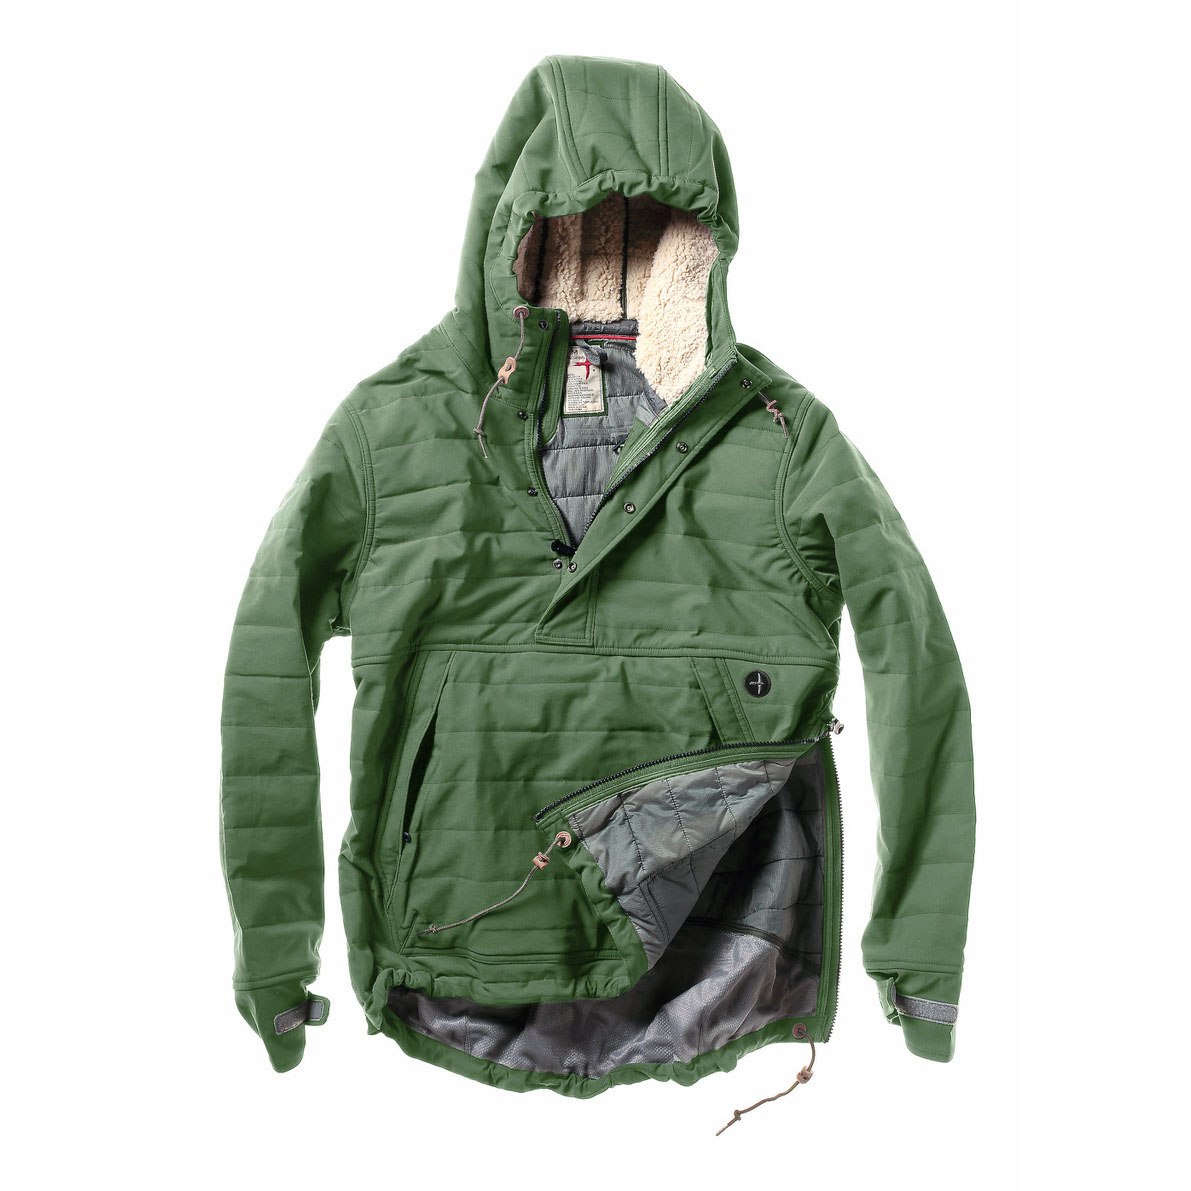 Relwen Channel Anorak - Exclusive - Turf Green | Insulated Jackets